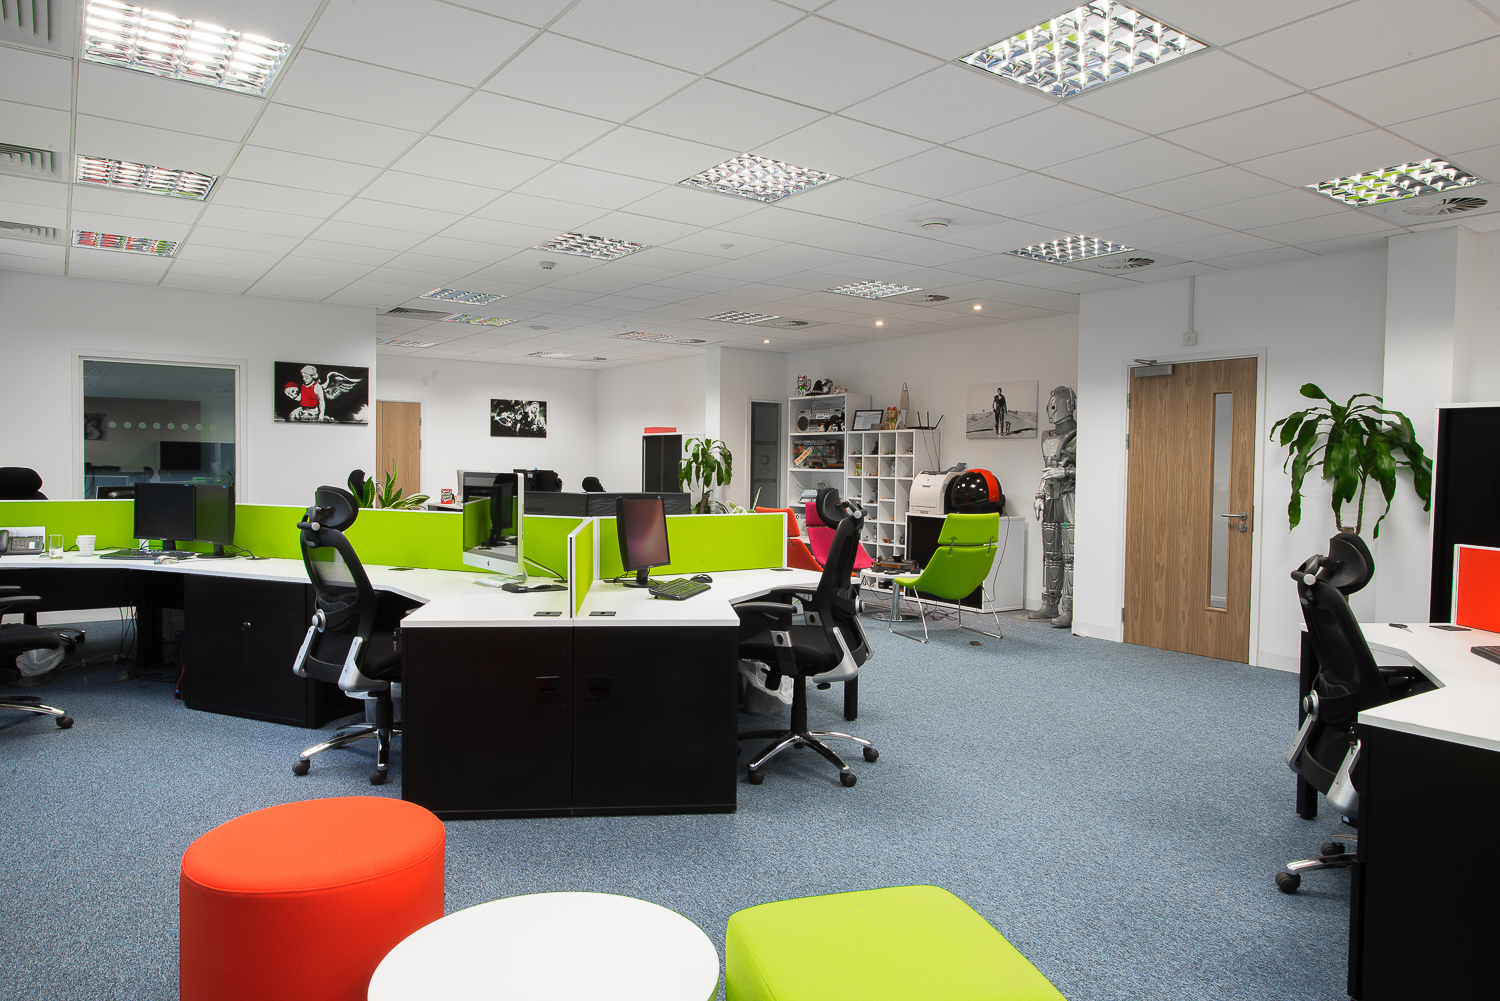 interior-photography-commercial-dorset-arena-business-centres-9.jpg